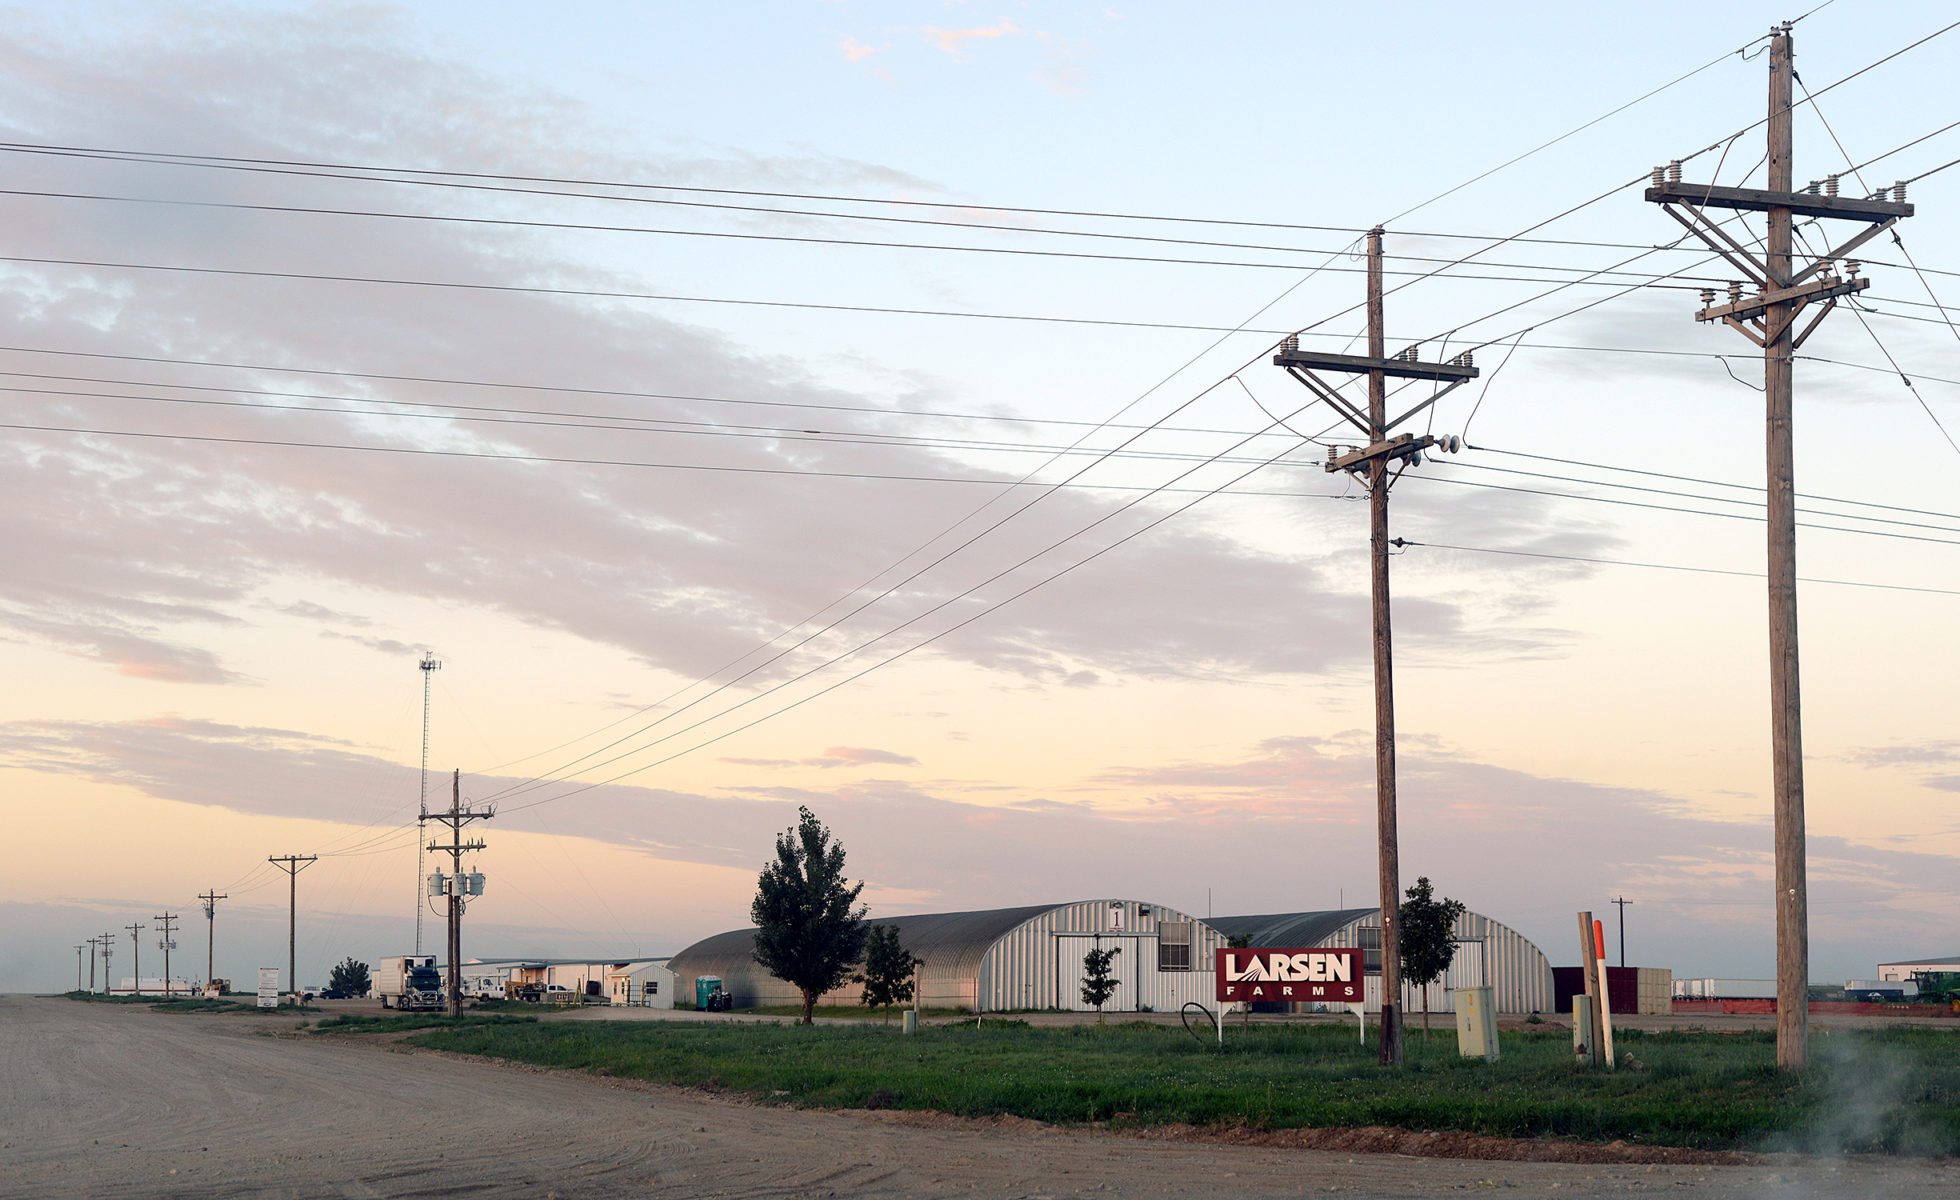 The entrance to Larsen Farms in Dalhart, Texas.